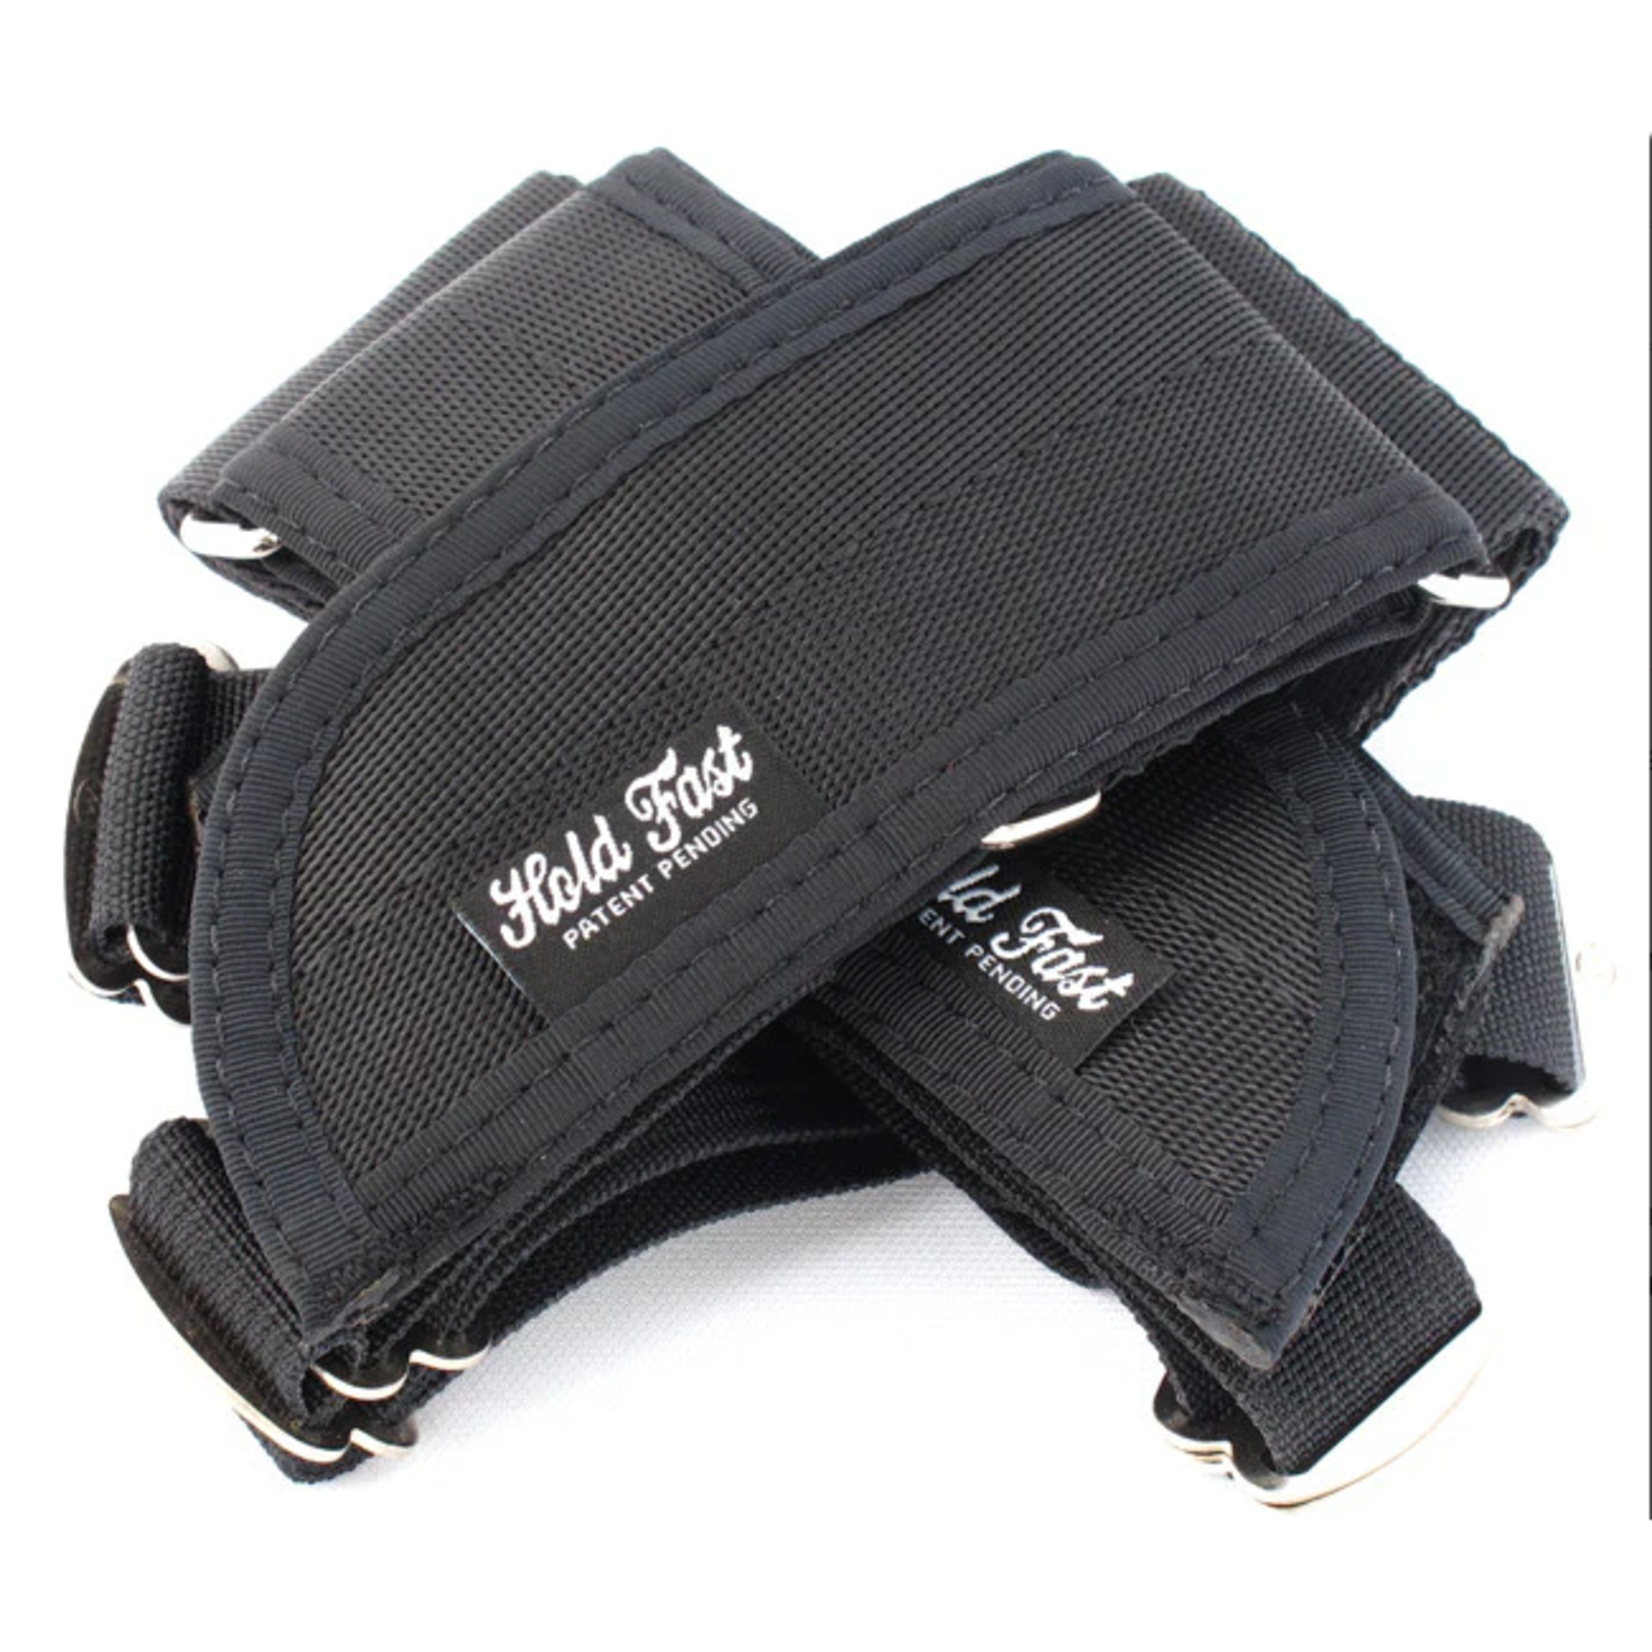 Hold Fast Hold Fast Original Bicycle Pedal Foot Retention Straps,